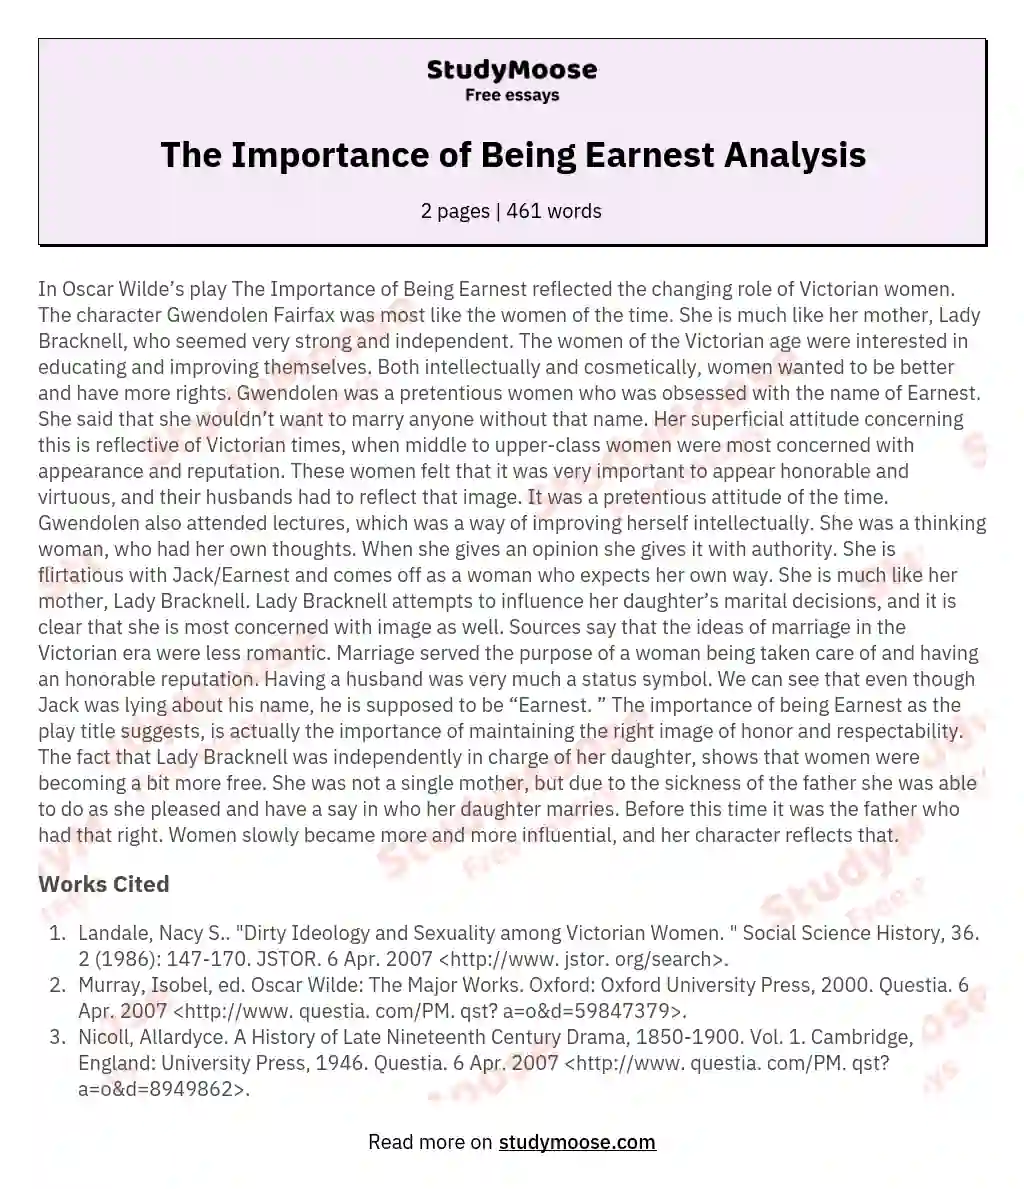 The Importance of Being Earnest Analysis